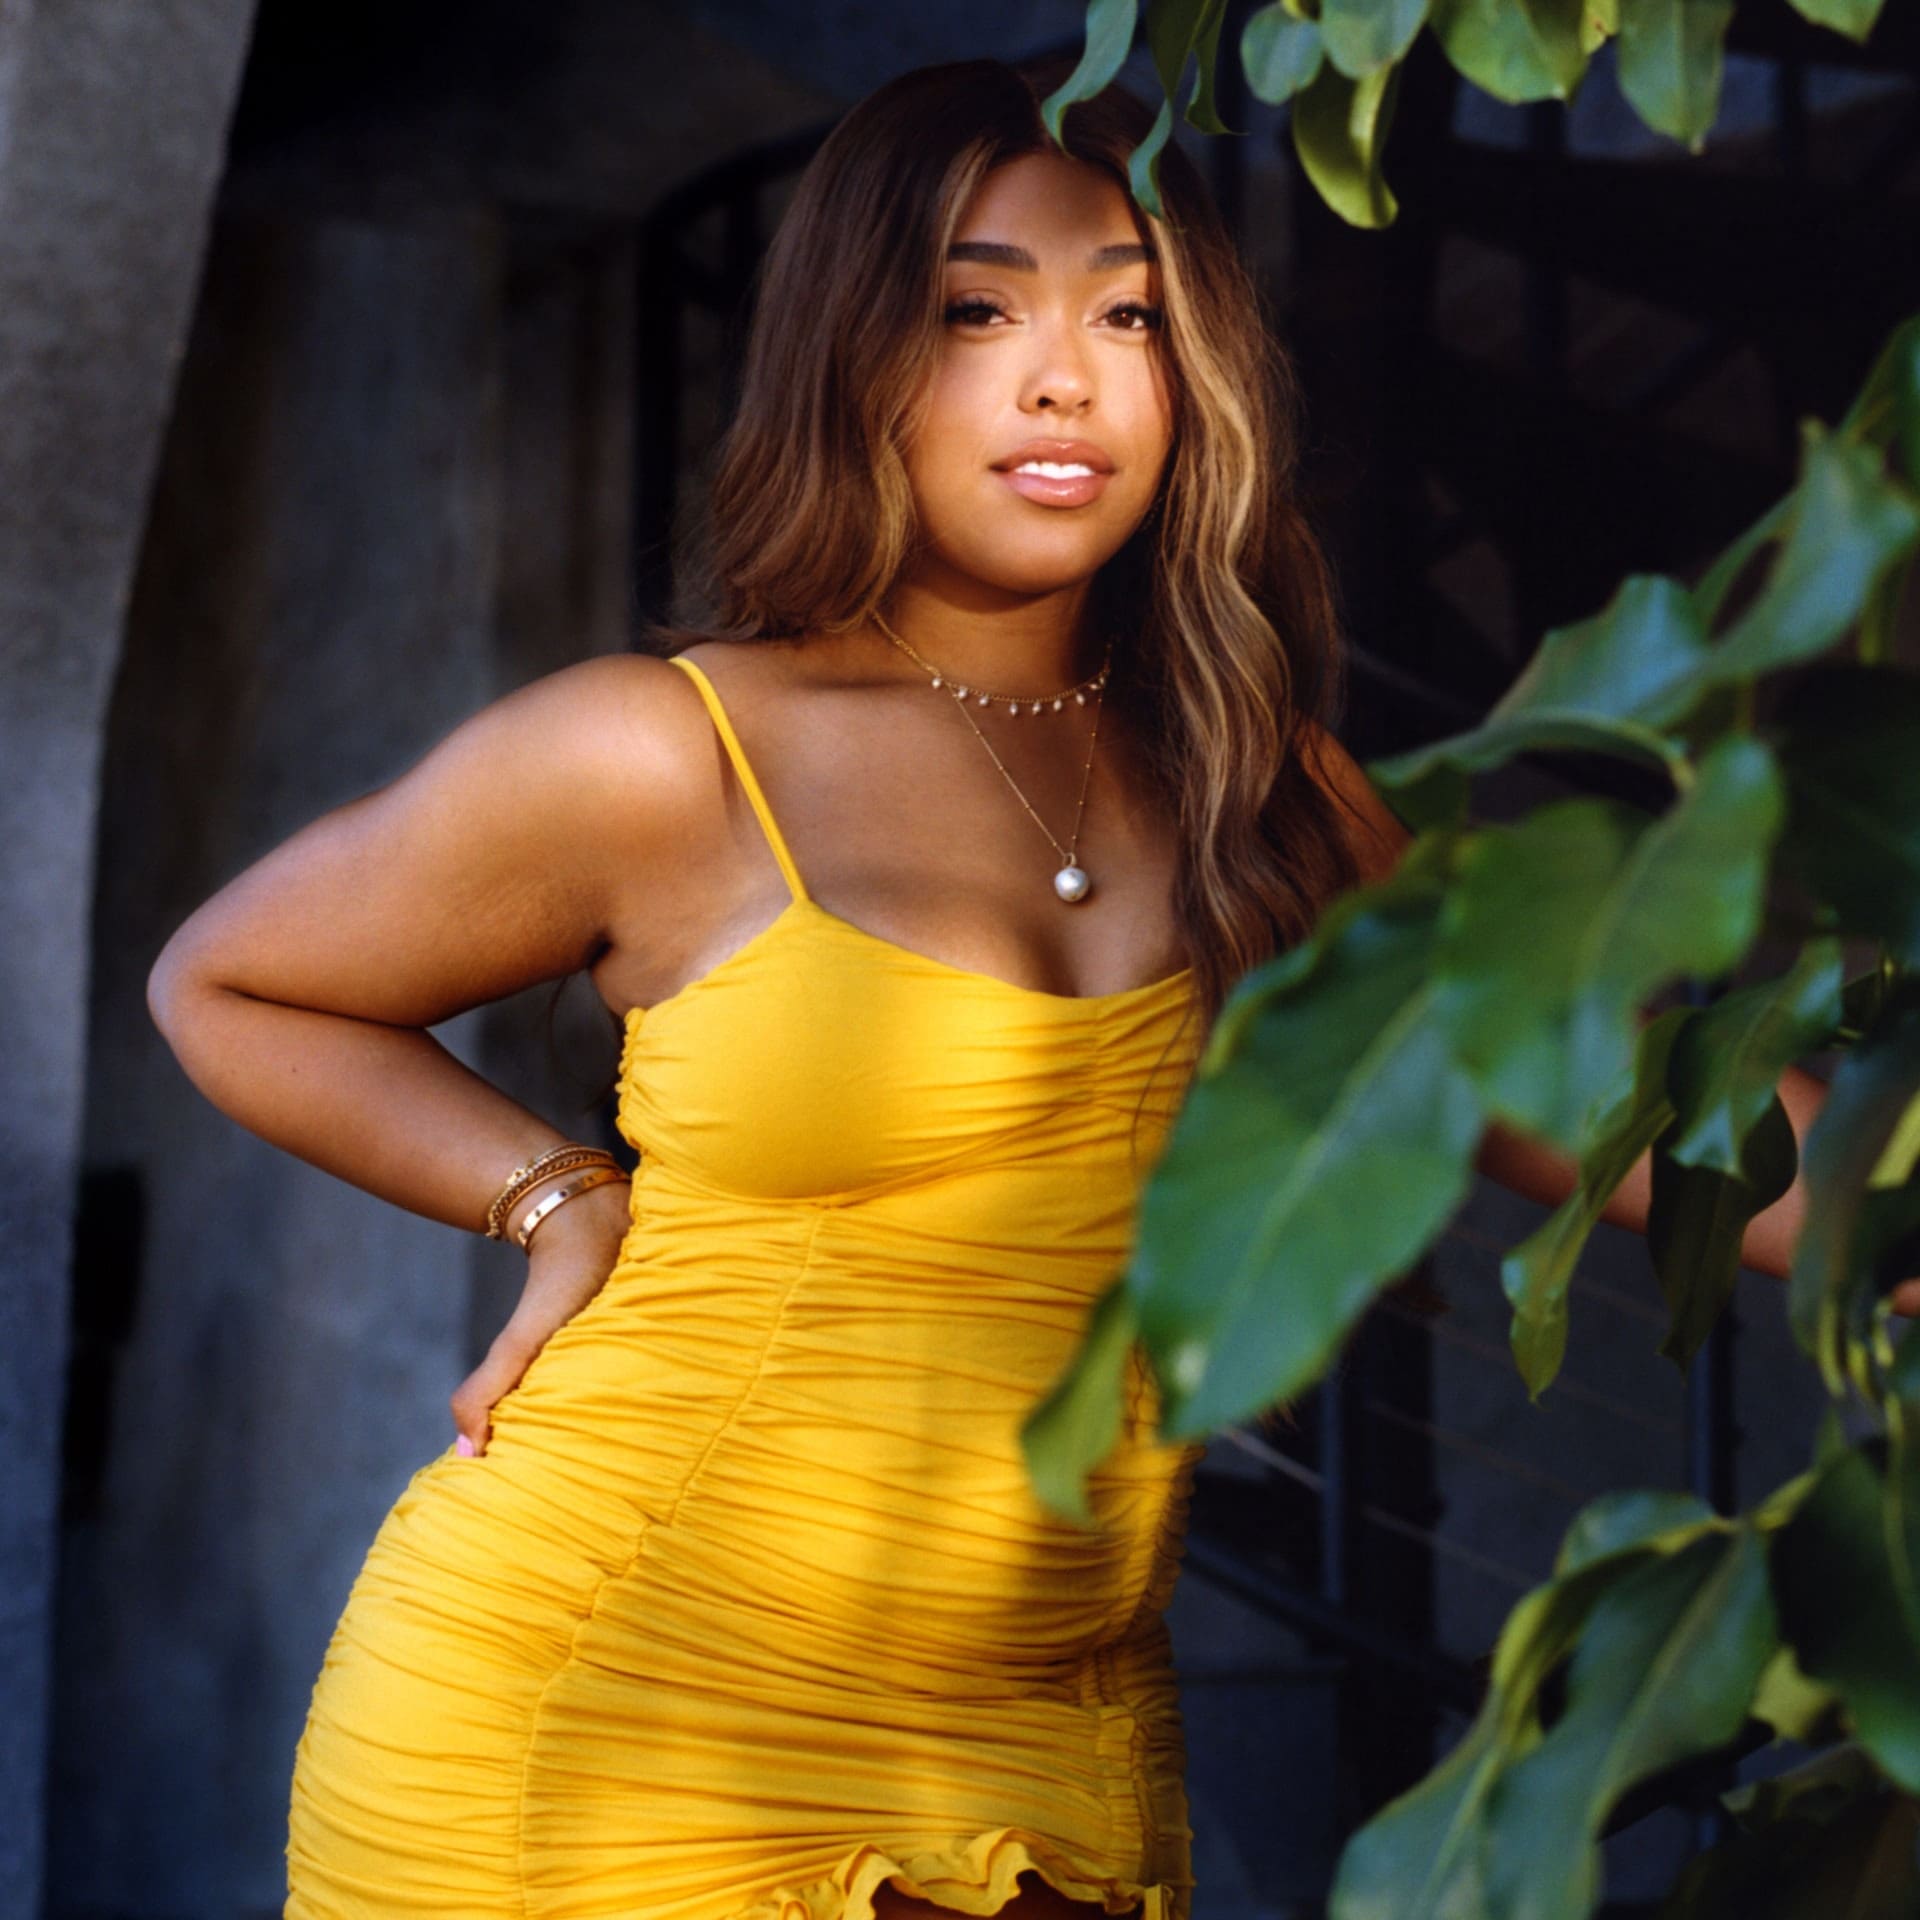 jordyn-woods-makes-fans-excited-with-this-hair-styling-video